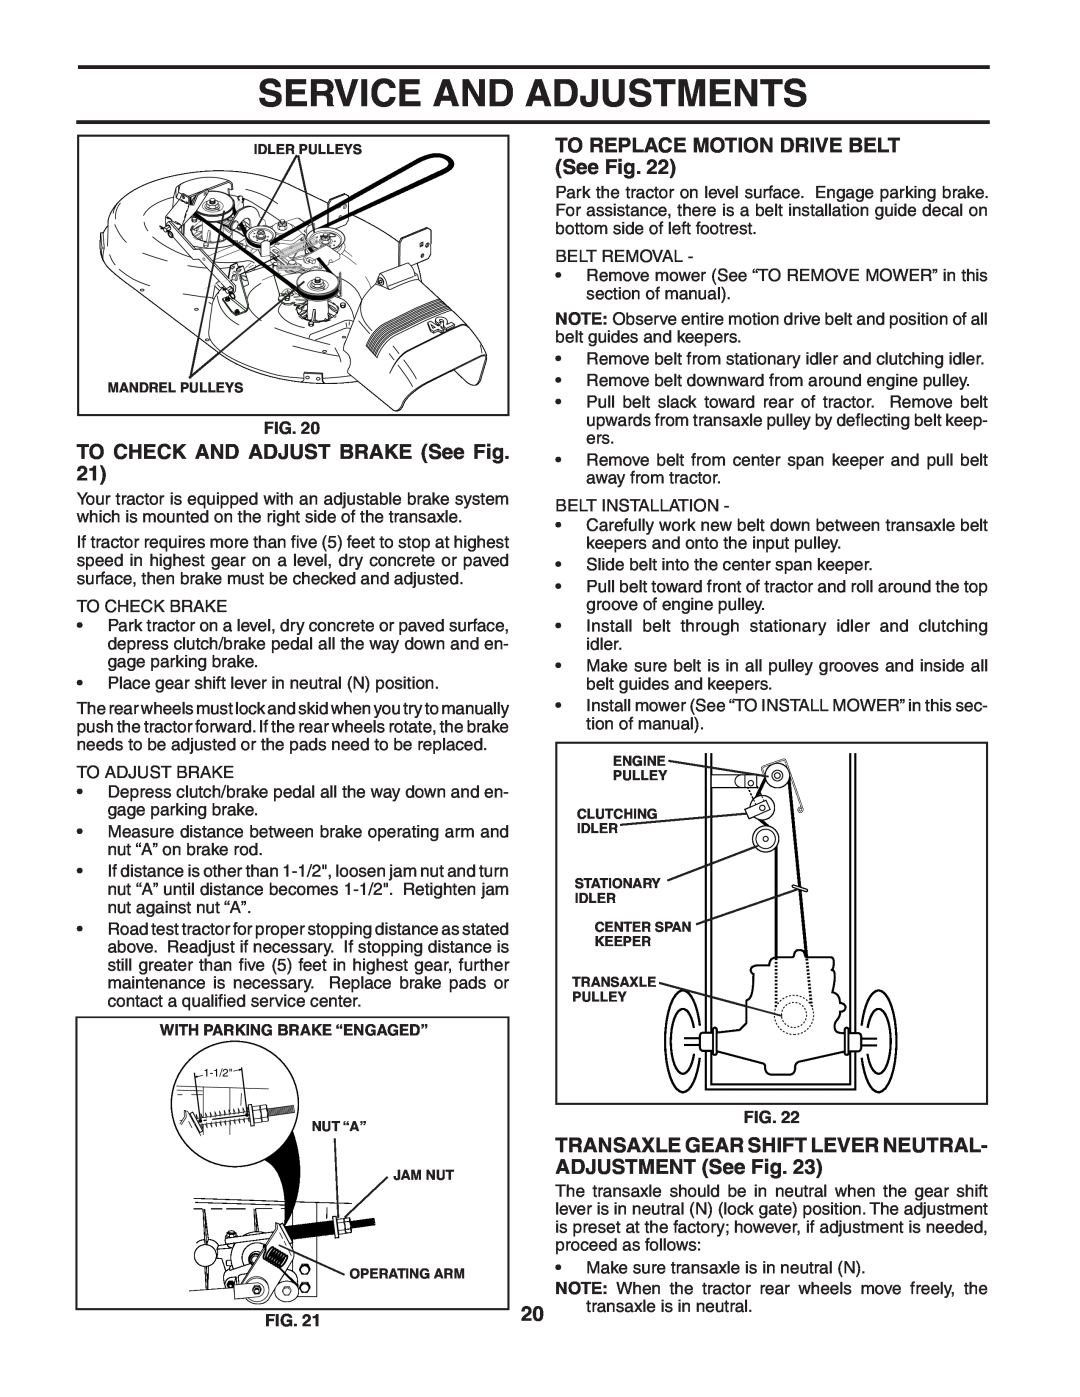 Poulan 188870 manual TO CHECK AND ADJUST BRAKE See Fig, TO REPLACE MOTION DRIVE BELT See Fig, Service And Adjustments 